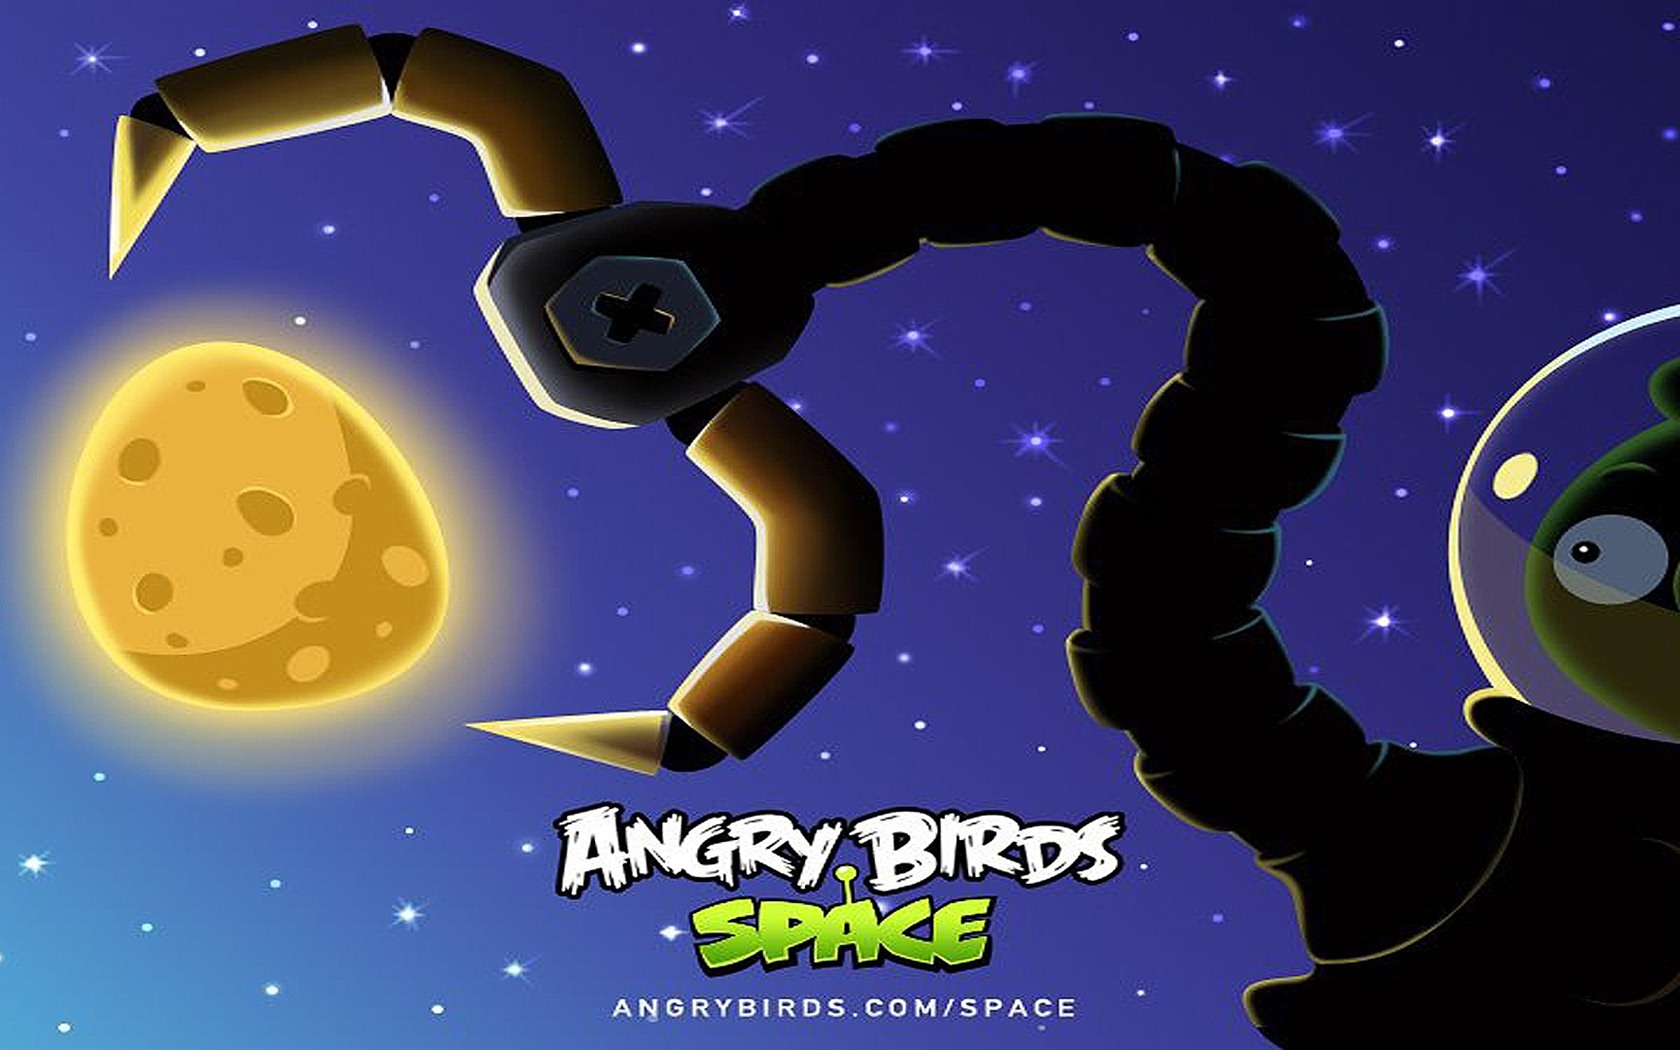 Angry Birds Game Wallpapers #24 - 1680x1050